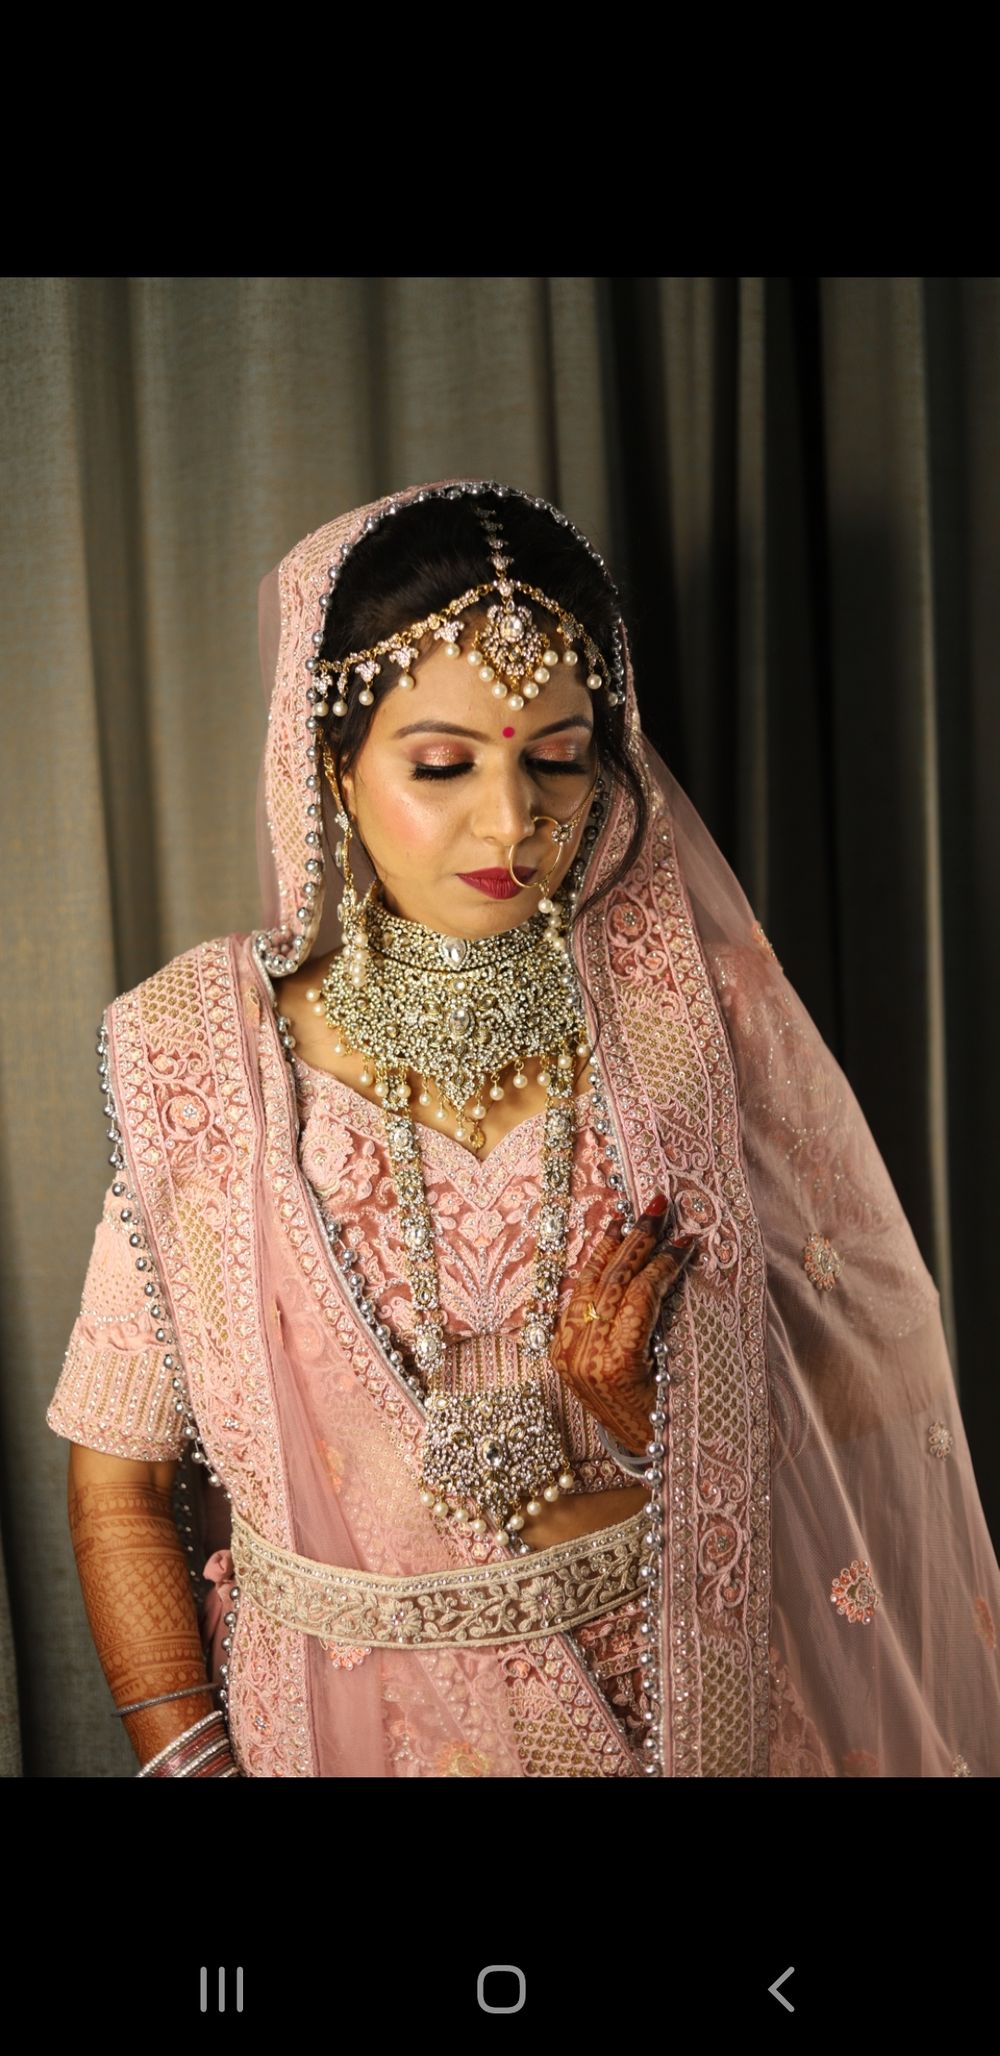 Photo From Brides - By Twinkle Jain Makeup Studio